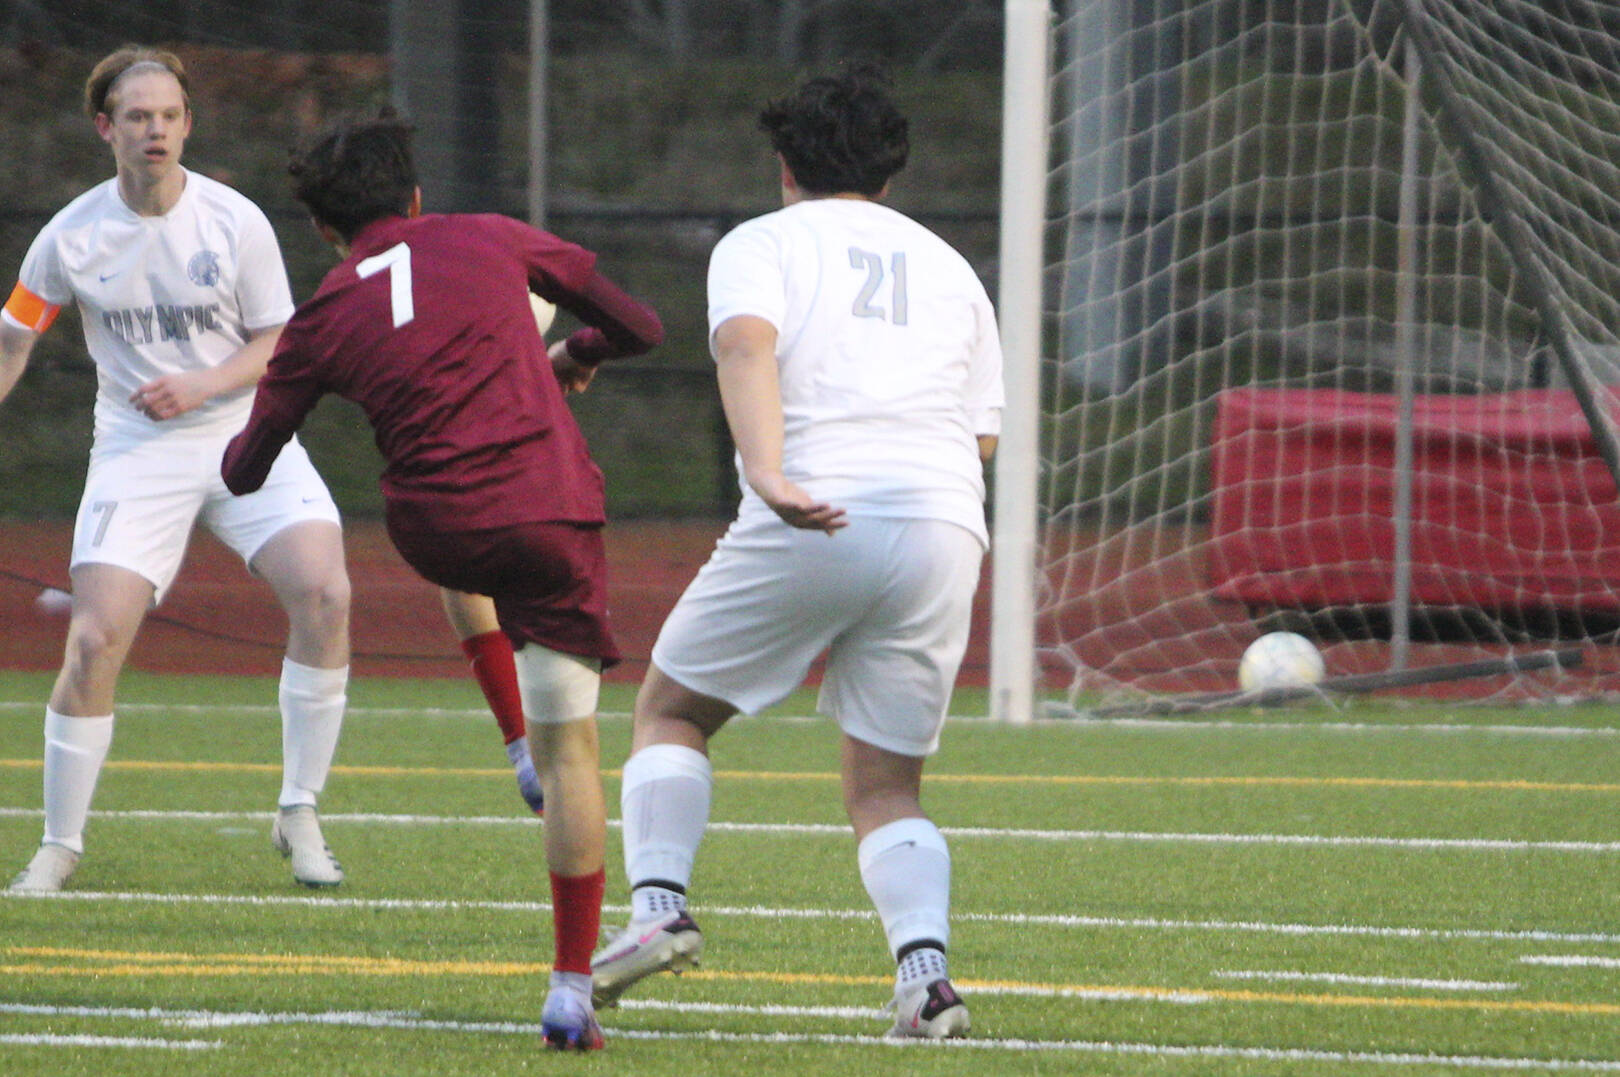 Sophomore Daniel Moran of the Bucs almost scored a goal on this shot, but the Olympic goalie was able to make the save.